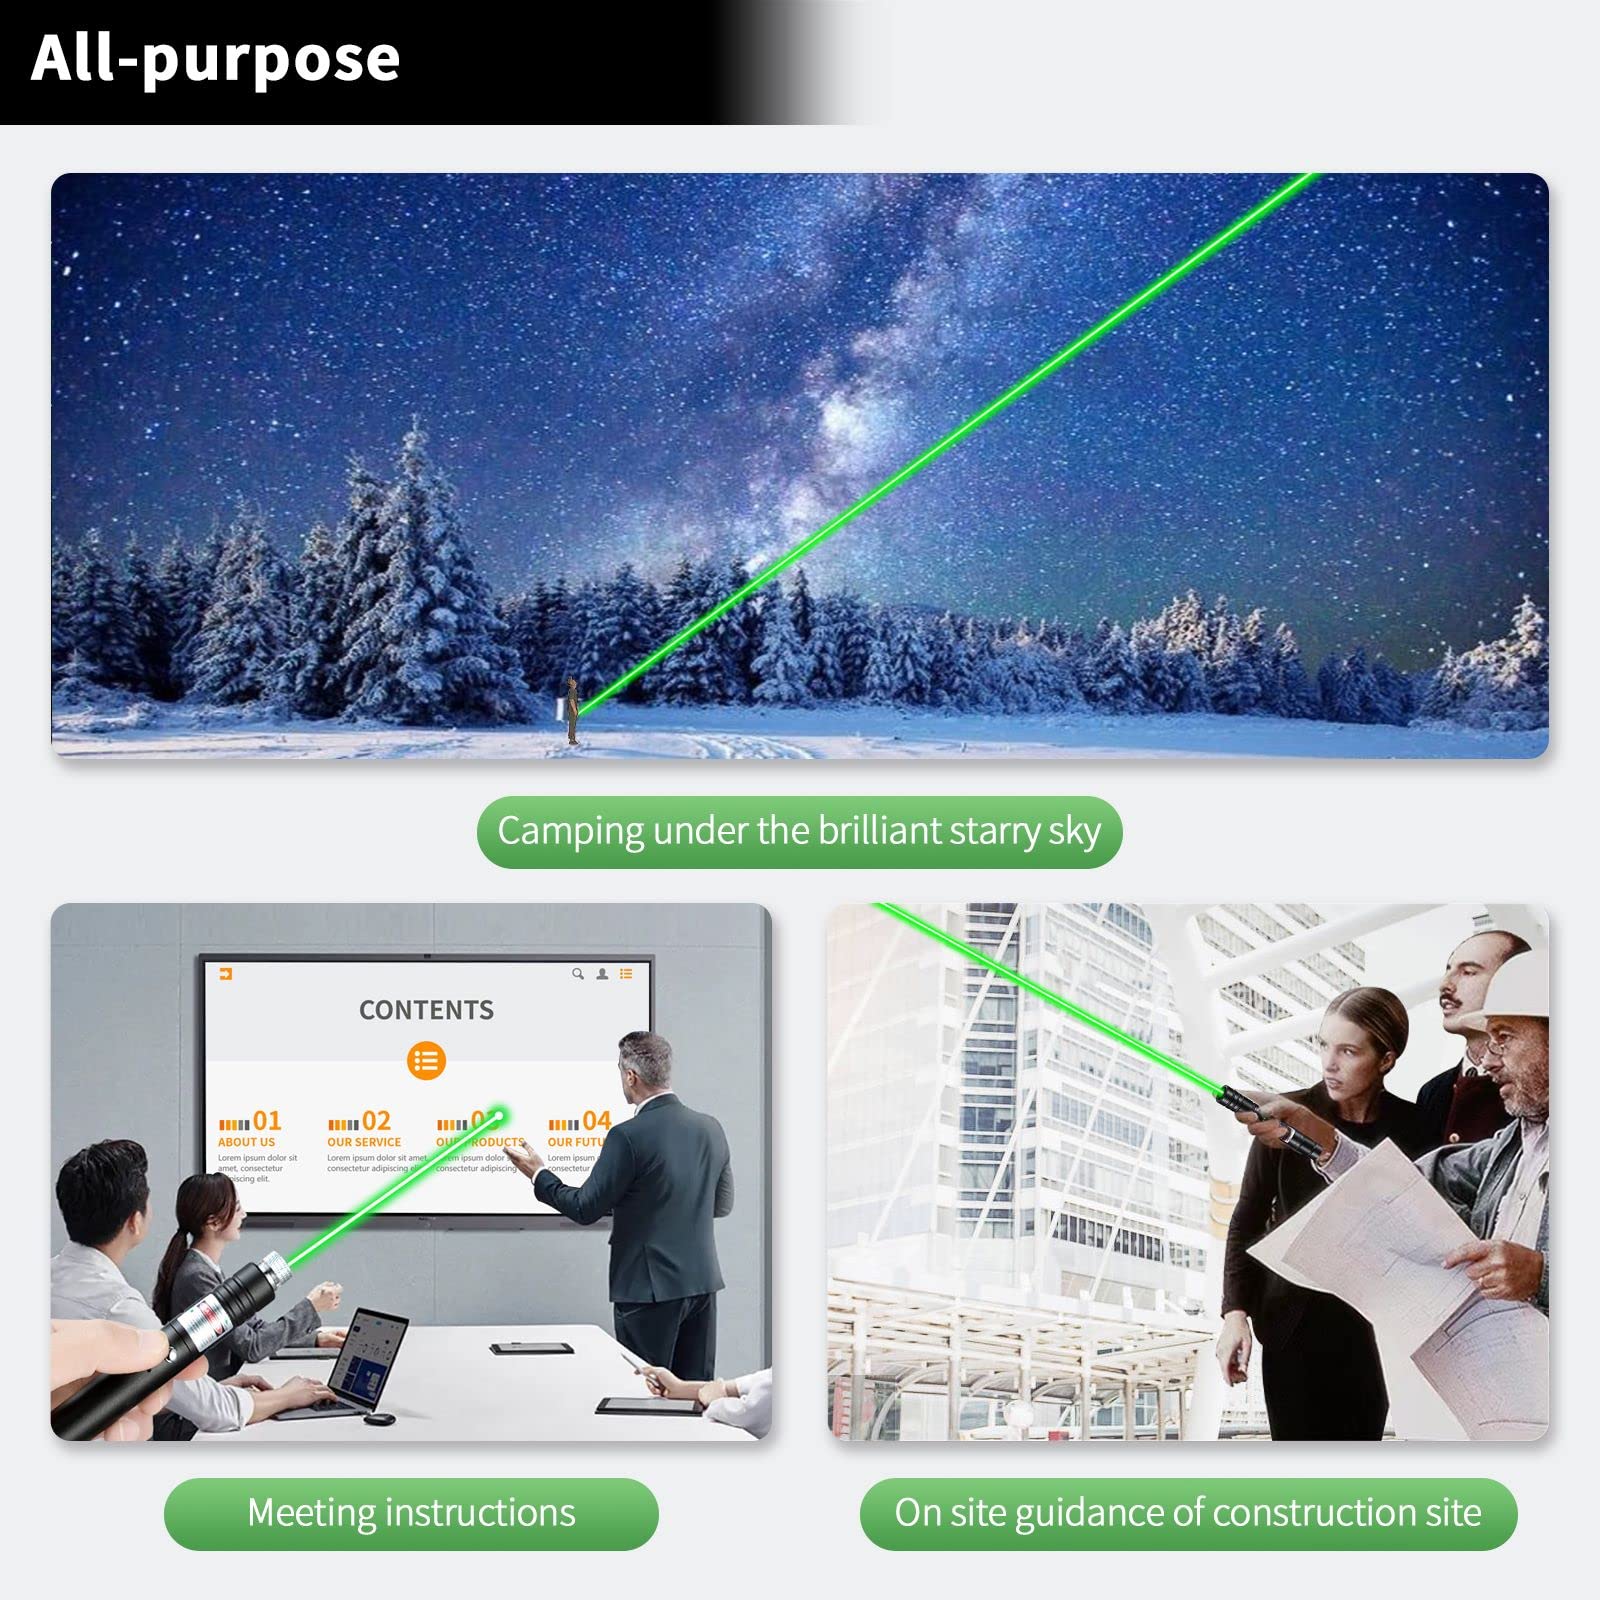 Long Range Green Laser Pointer High Power,[Material Upgrade] Laser Pointer Pen，[2000 metres] Green Lazer Pointer Rechargeable for Hiking,Cat Laser Toy USB Charge